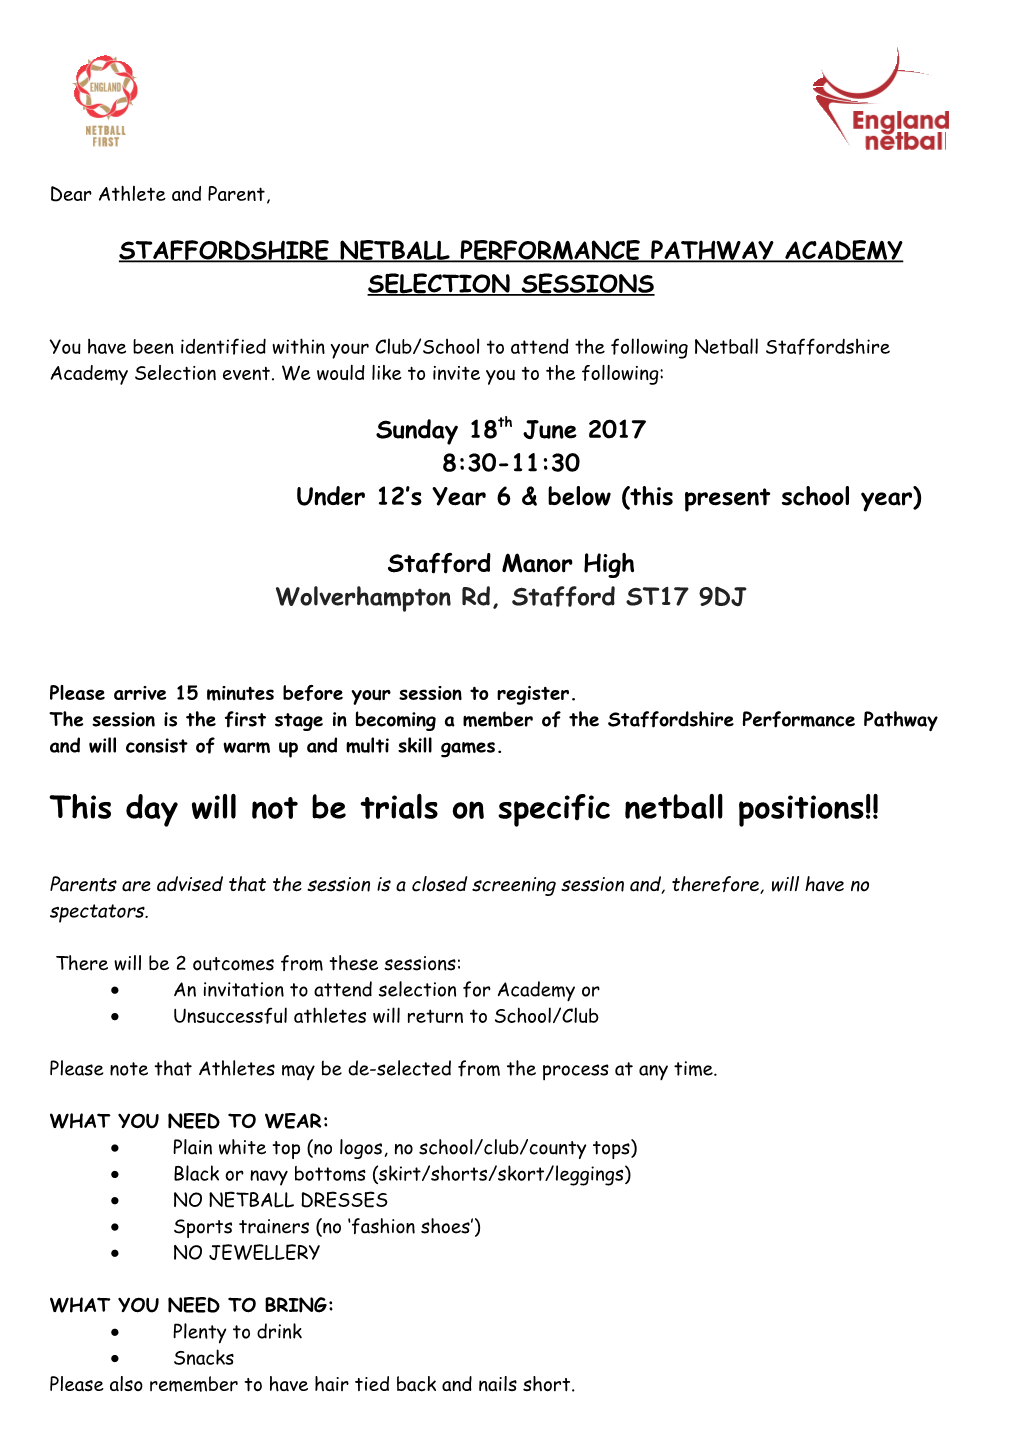 Staffordshire Netball Performance Pathway Academy Selection Sessions